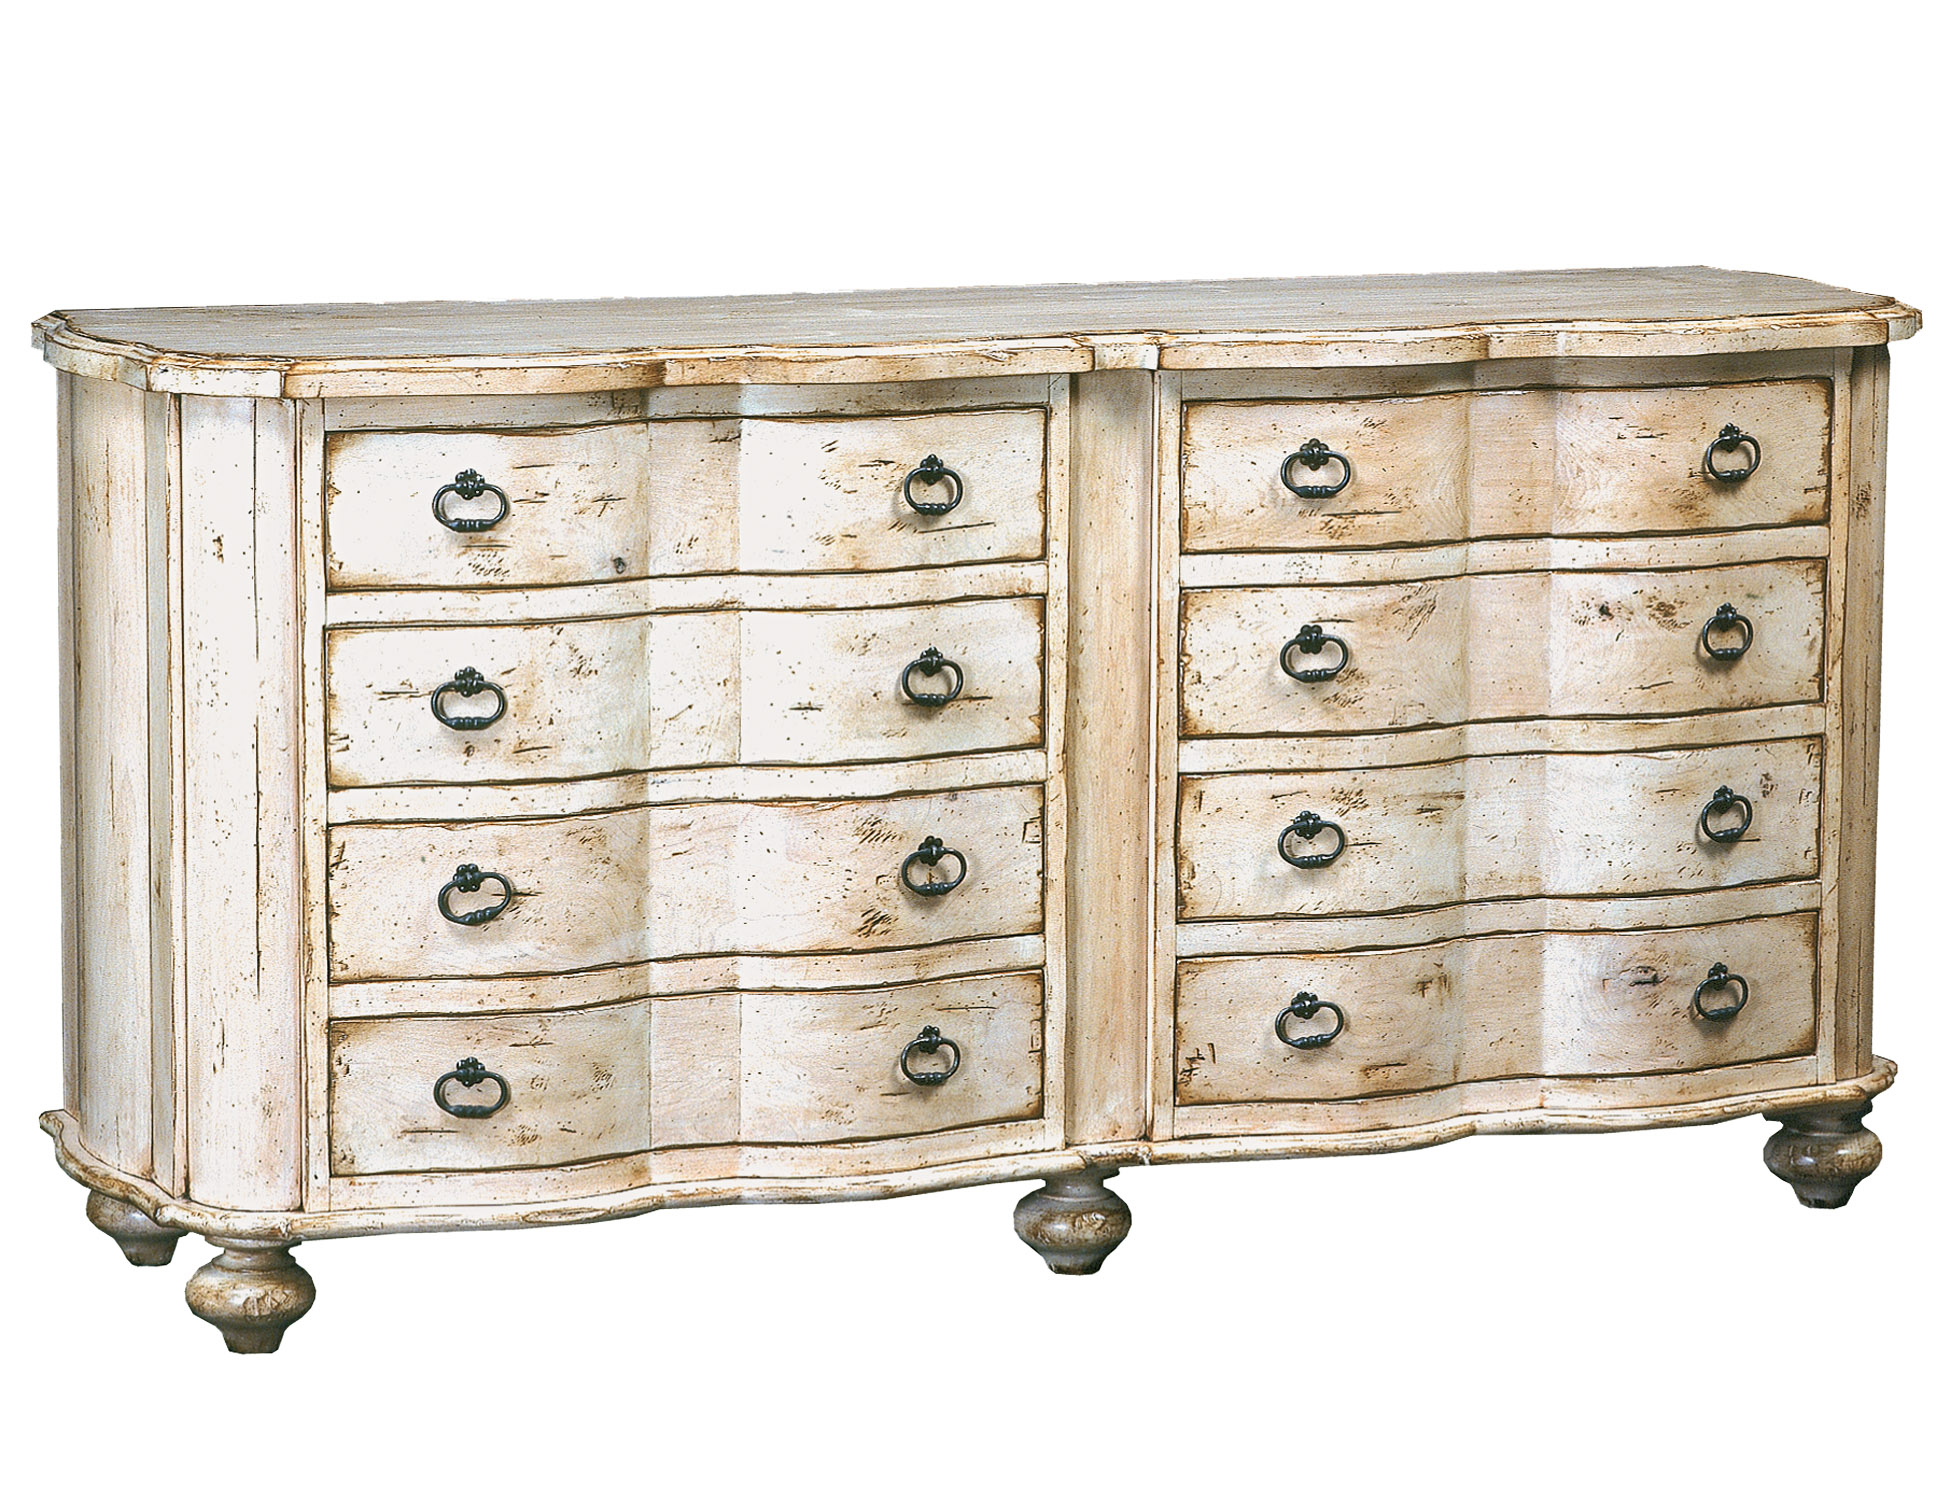 Marseilles transitional curved front chest of drawers dresser with bun feet by Woodland furniture in Idaho Falls